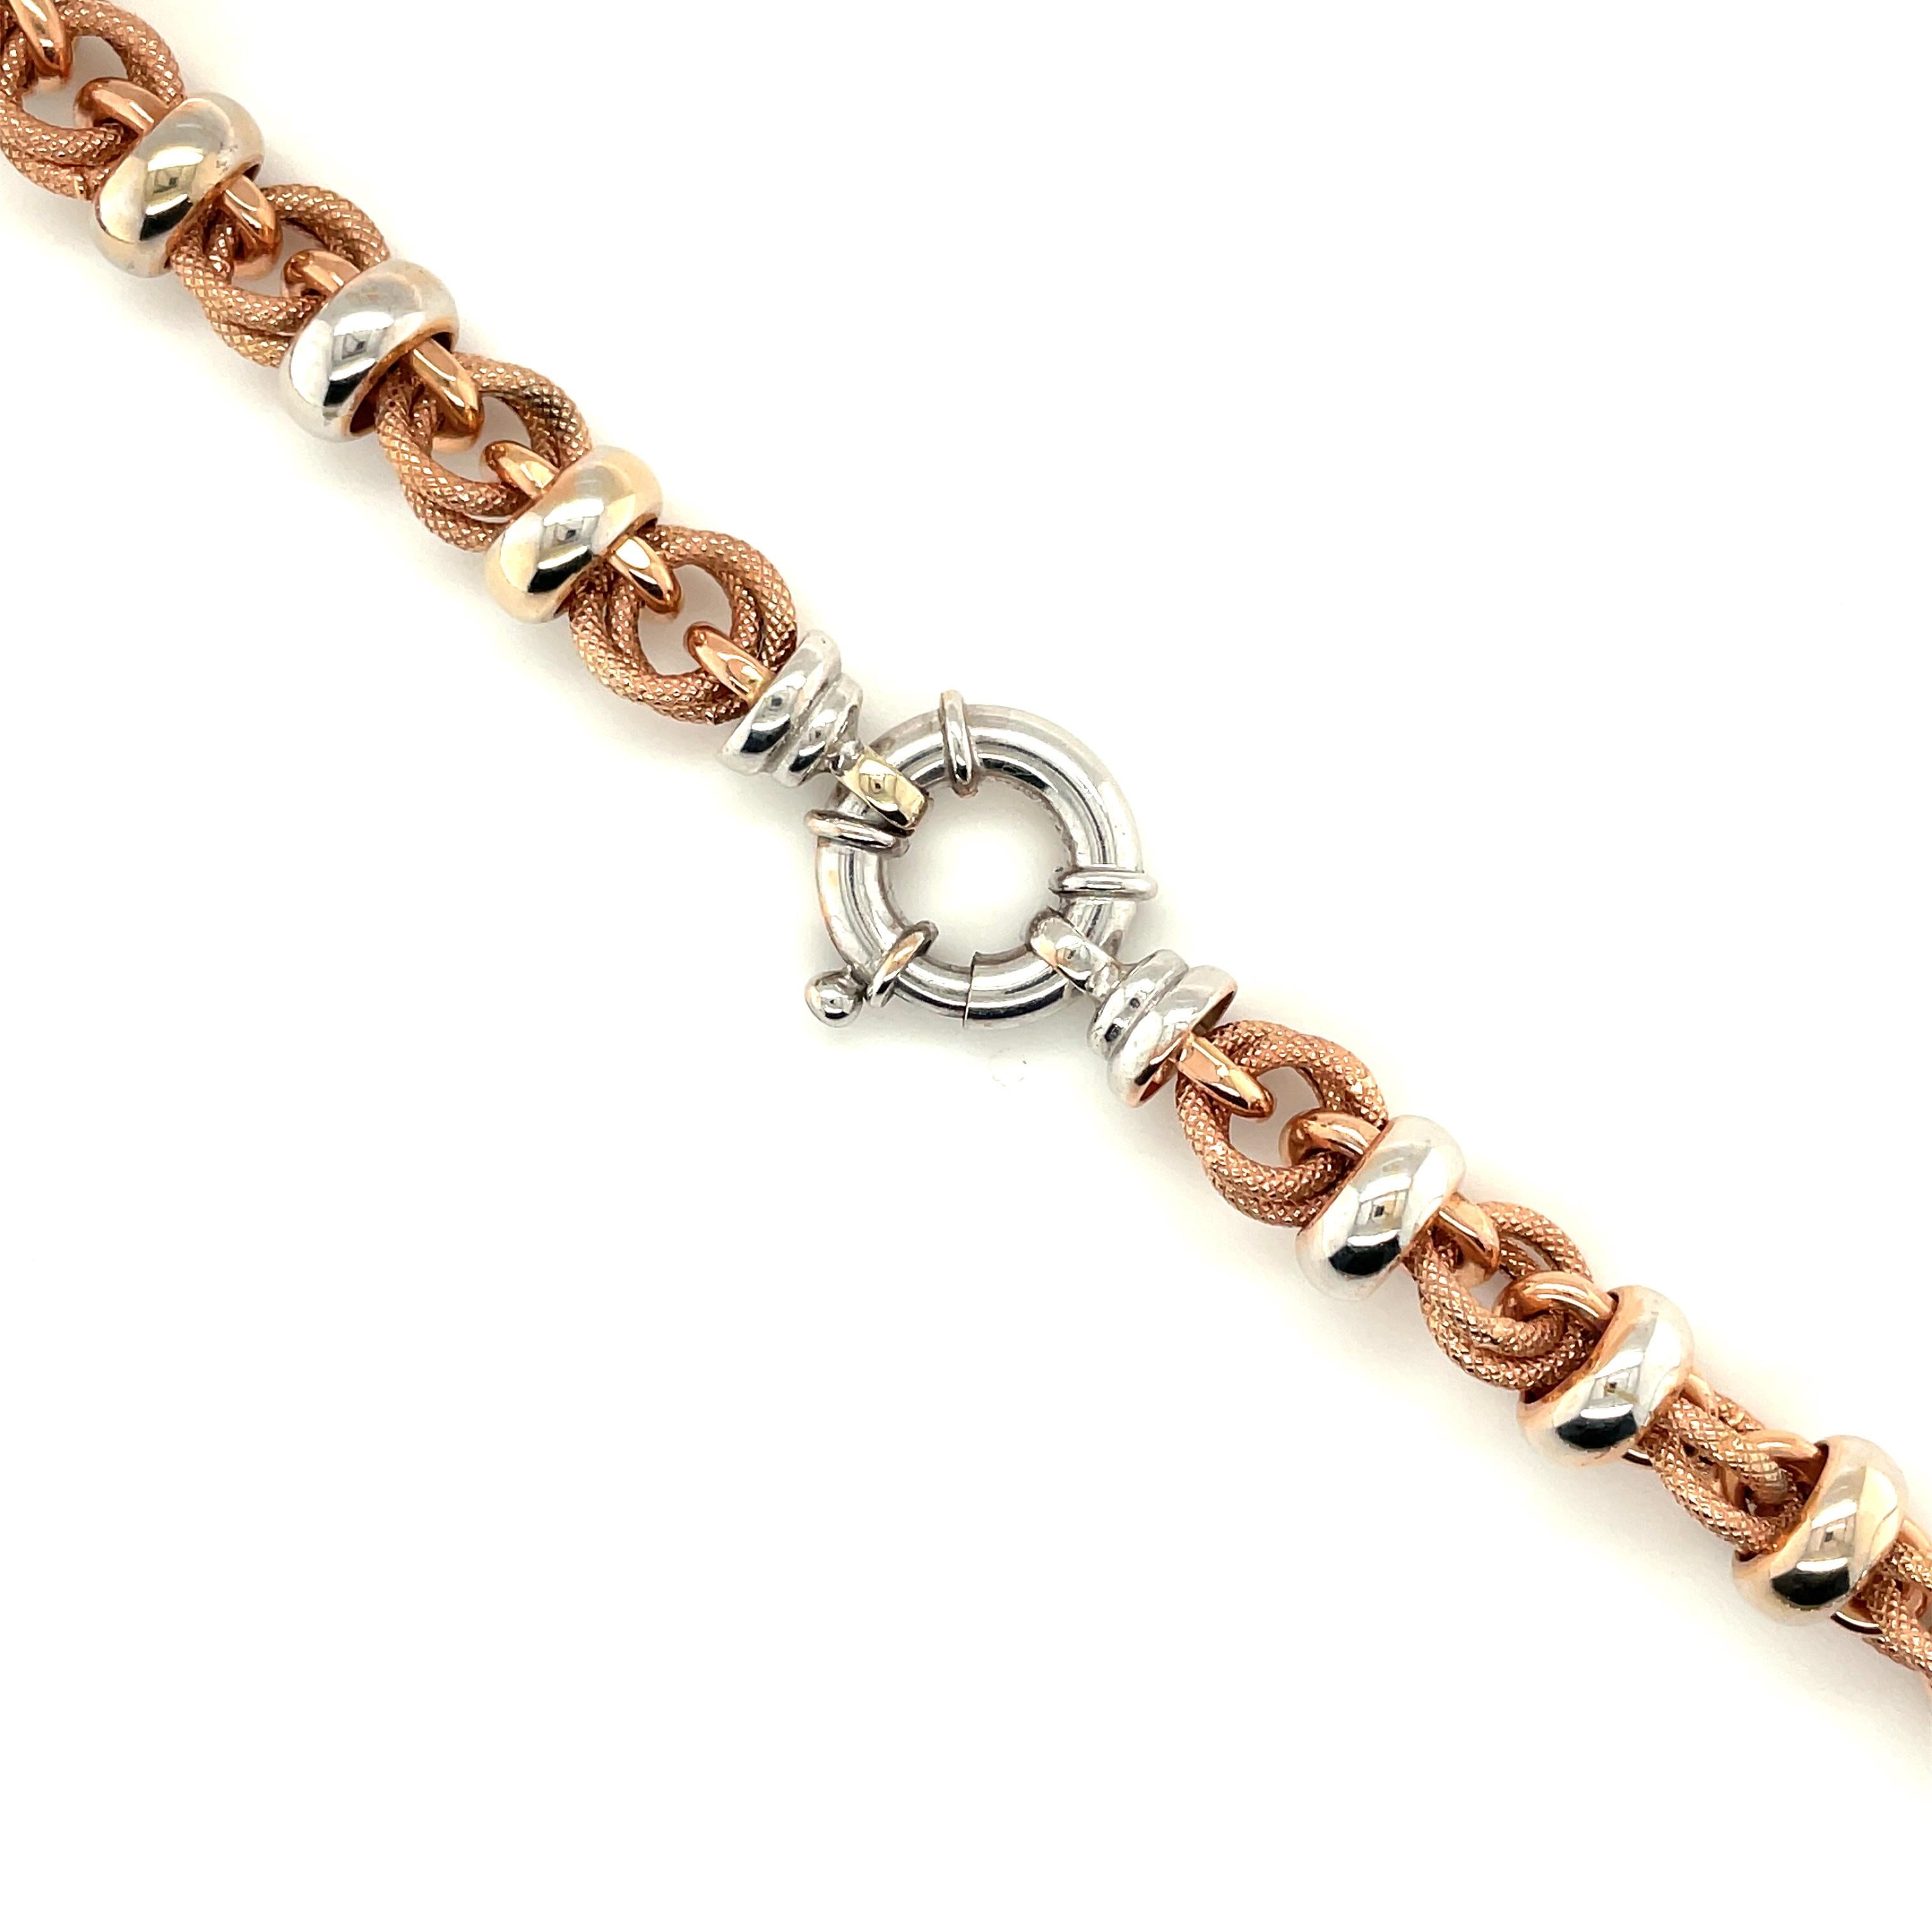 18K White and Rose Gold Link Necklace

Marked 18K Italy and having Italian assay mark 1760 AR. Completed by a spring ring clasp. Rose gold links having a textured surface, juxtaposed with with gold links having a high polish finish.

Grams 50.80

17